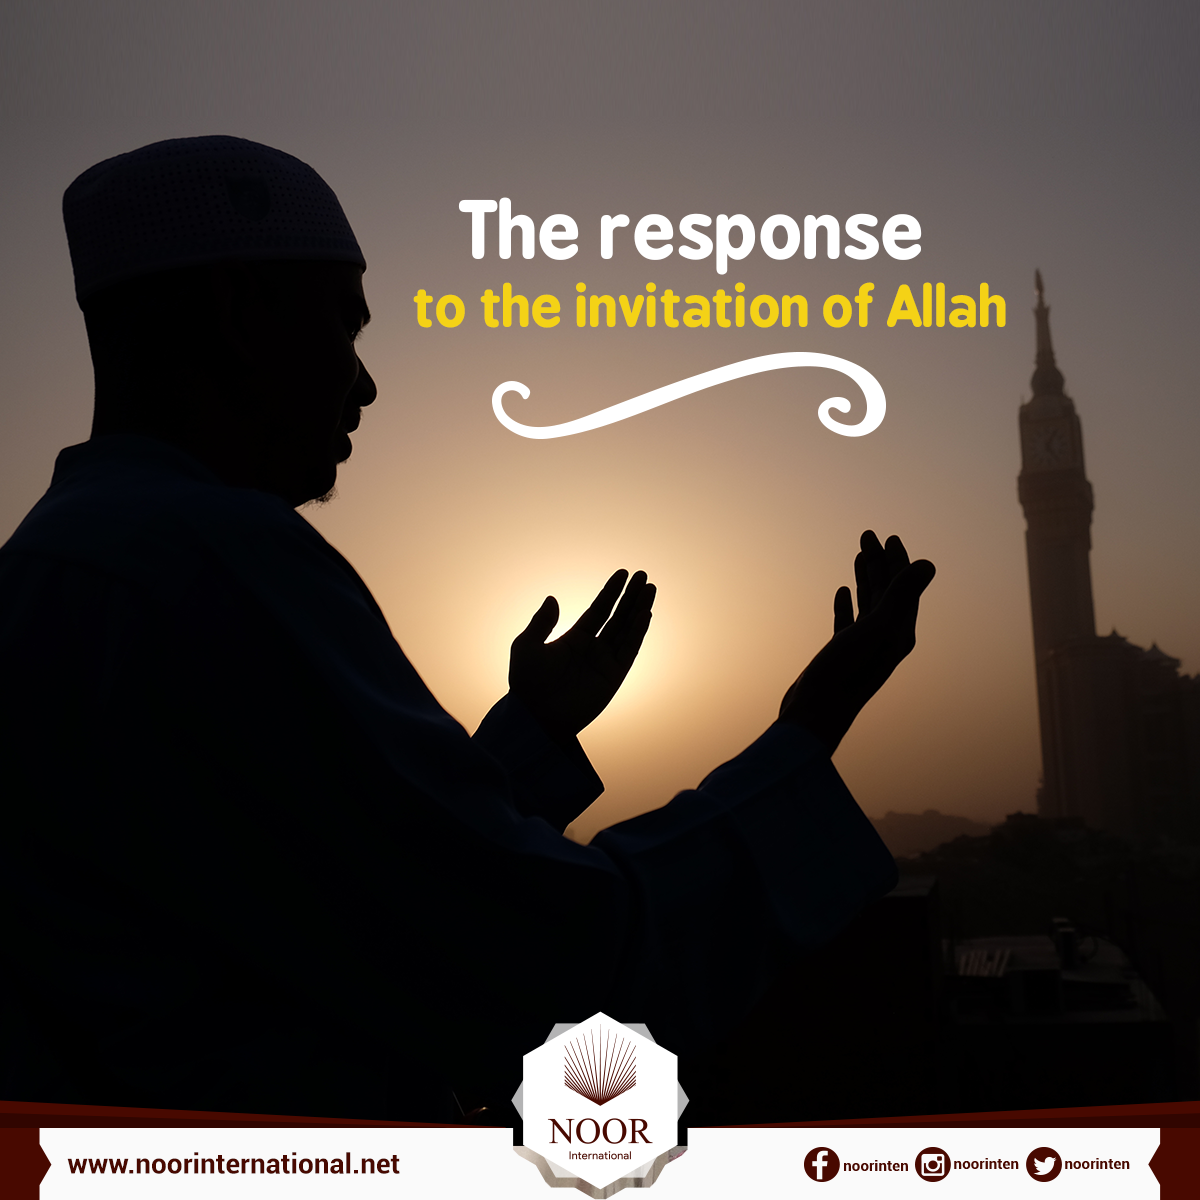 The response to the invitation of Allah